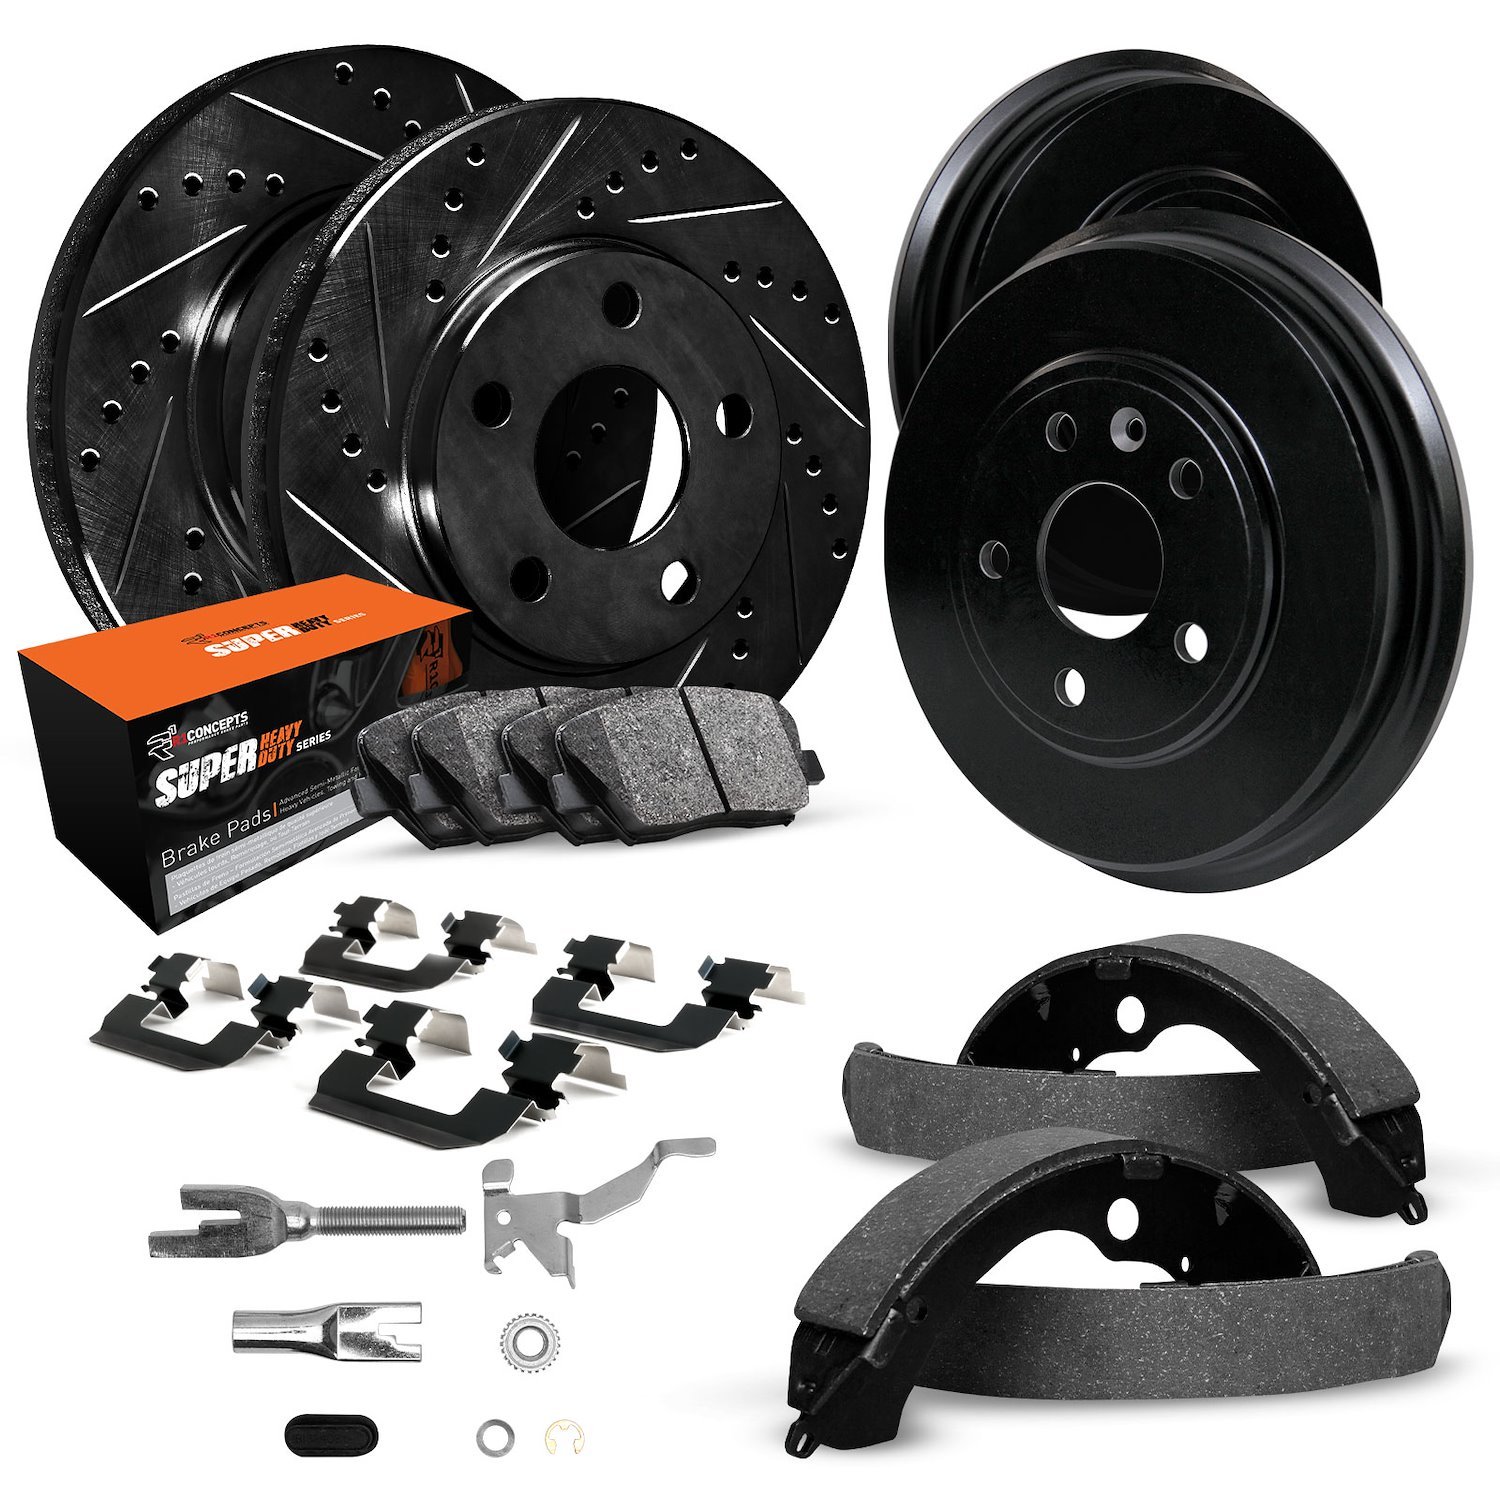 E-Line Slotted Black Brake Rotor & Drum Set w/Super-Duty Pads, Shoes, Hardware/Adjusters, 1997-2004 Ford/Lincoln/Mercury/Mazda